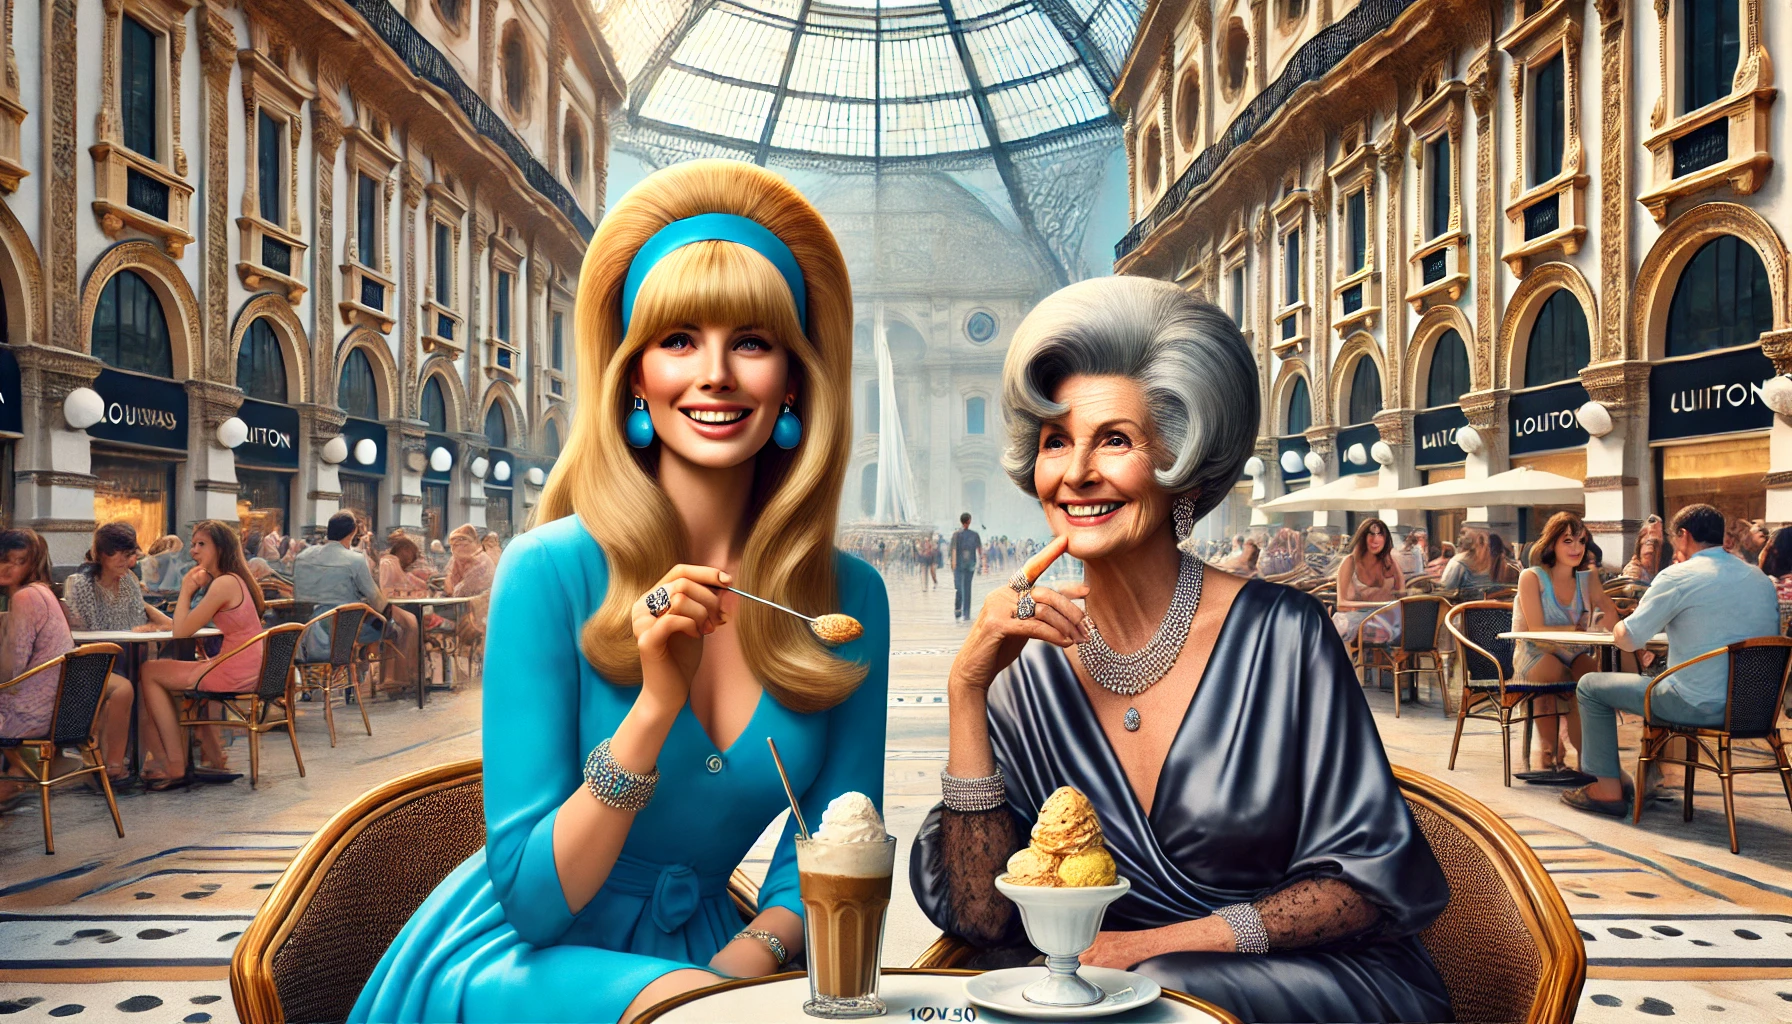 Kathy Fields and her mother Marie Read Saia, both sitting down with big smiles and enjoying gelato and drinks at a café in Milan, Italy. The backdrop captures the iconic Cathedral 'Duomo' and the glass shopping mall 'Galleria Vittorio Emanuele II'